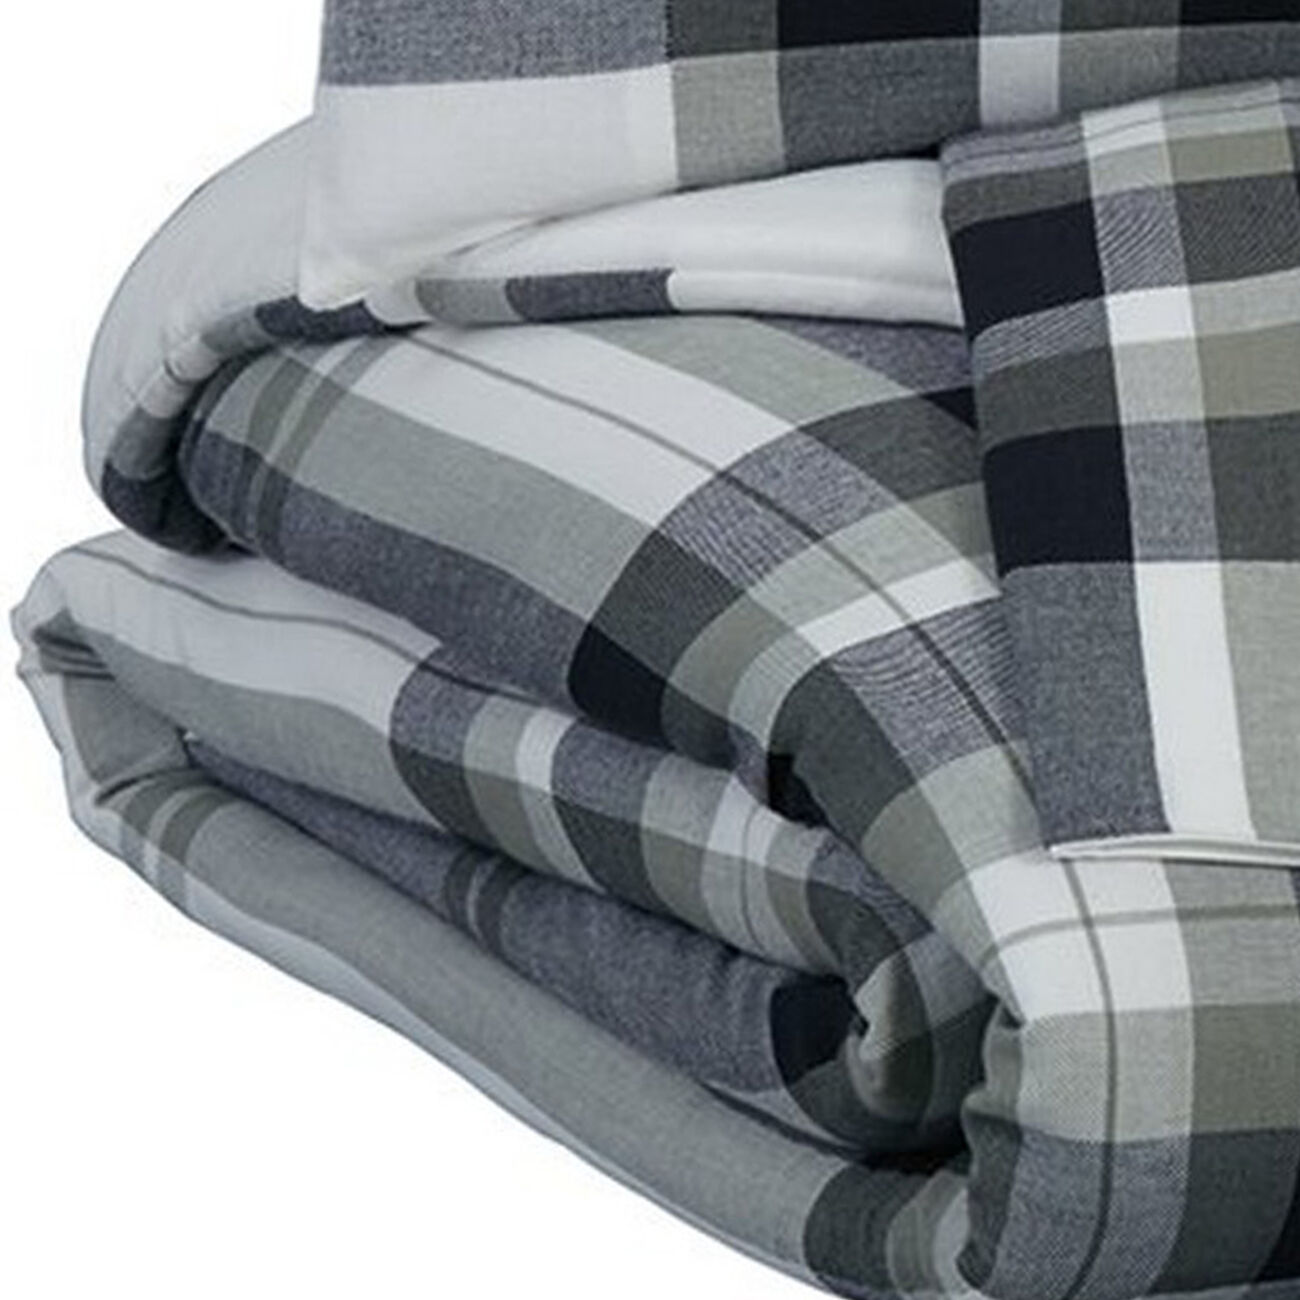 3 Piece Fabric Queen Comforter Set with Plaid Pattern, Black and Gray